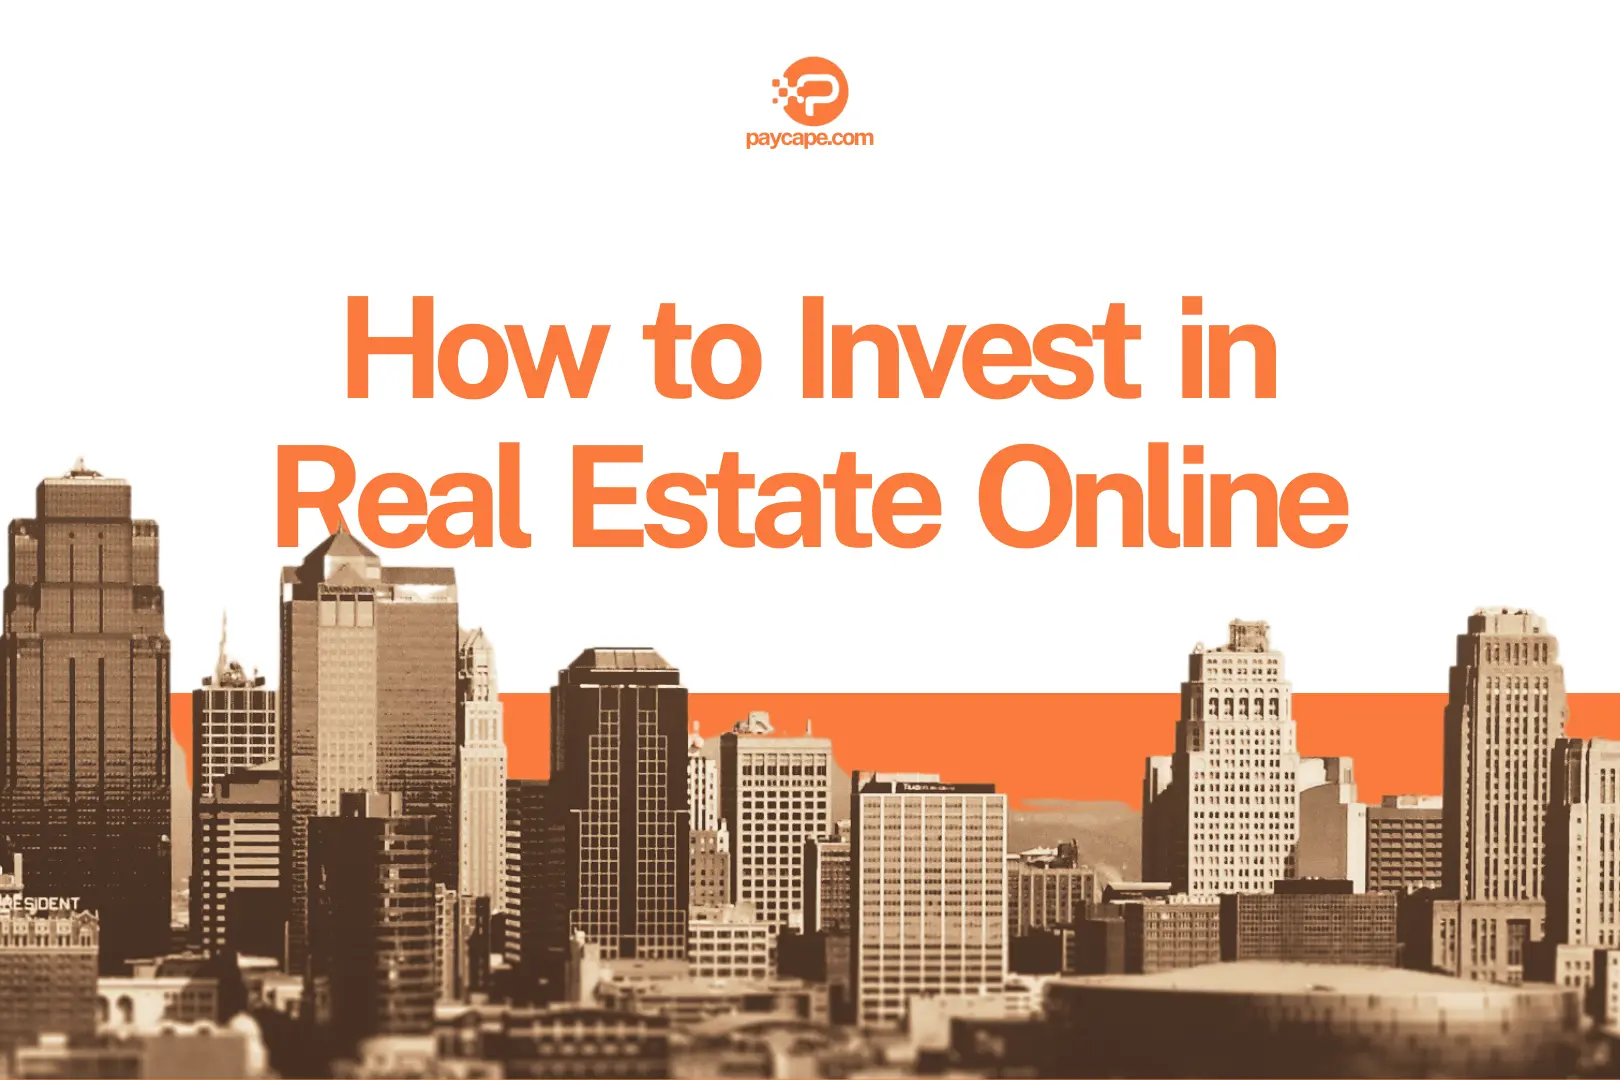 How to Invest in Real Estate Online